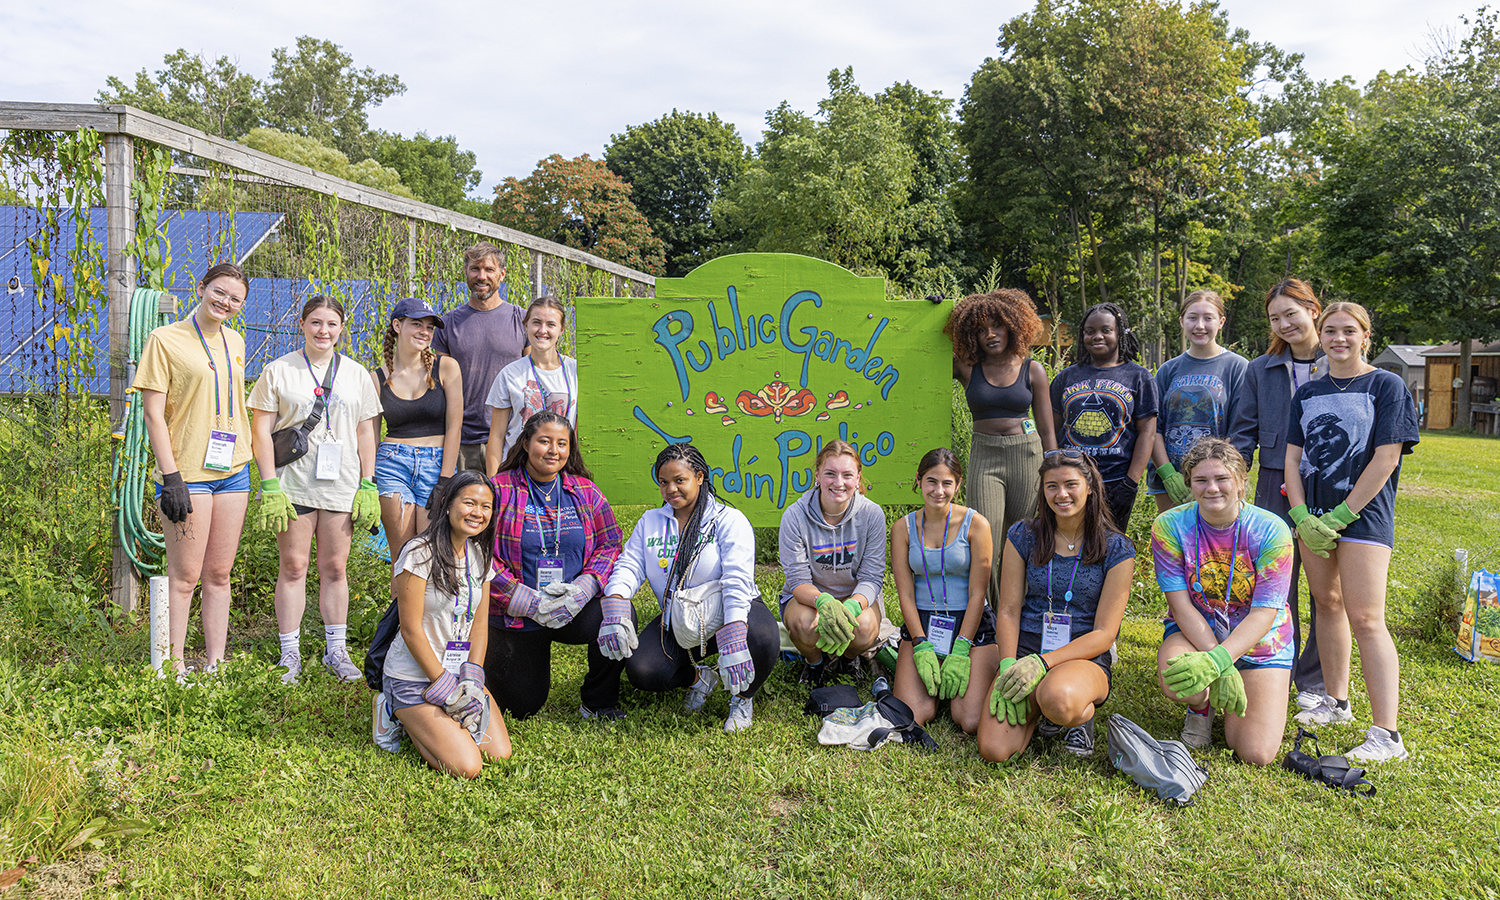 As part of Orientation, students participate in community service activities. Here, they gather for a photo after working in the community garden on State Street.